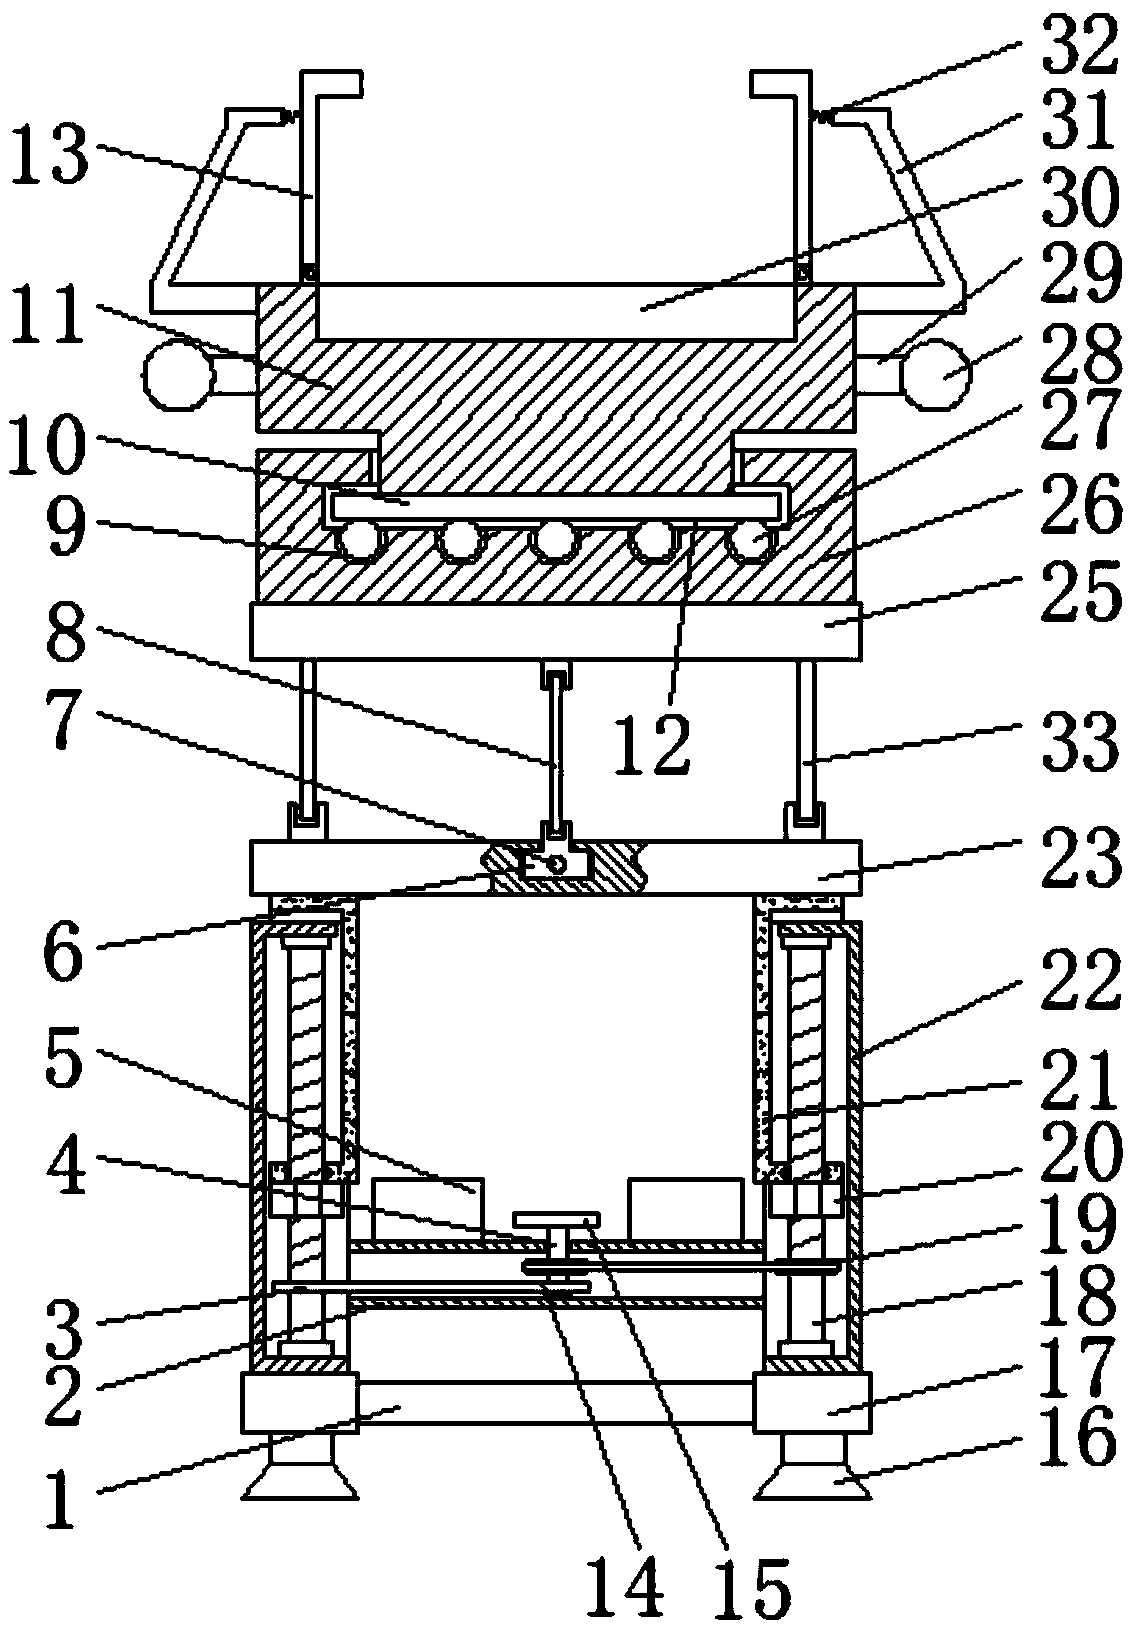 Supporting platform for frequency converter assembly